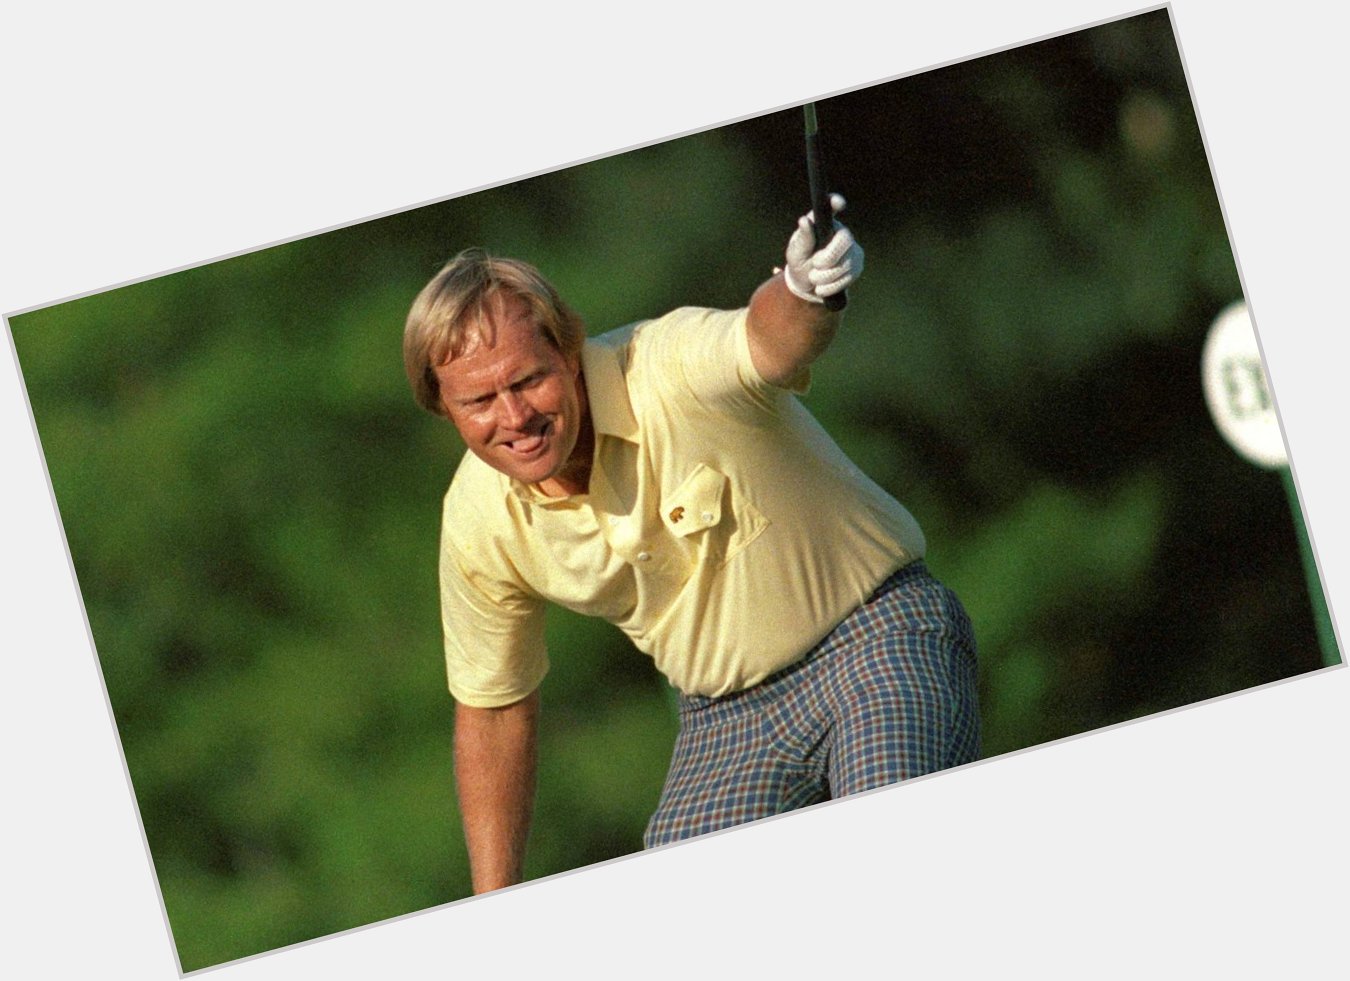 Happy Birthday to Jack Nicklaus His impact on the sport of golf should not be underestimated.

What a player  